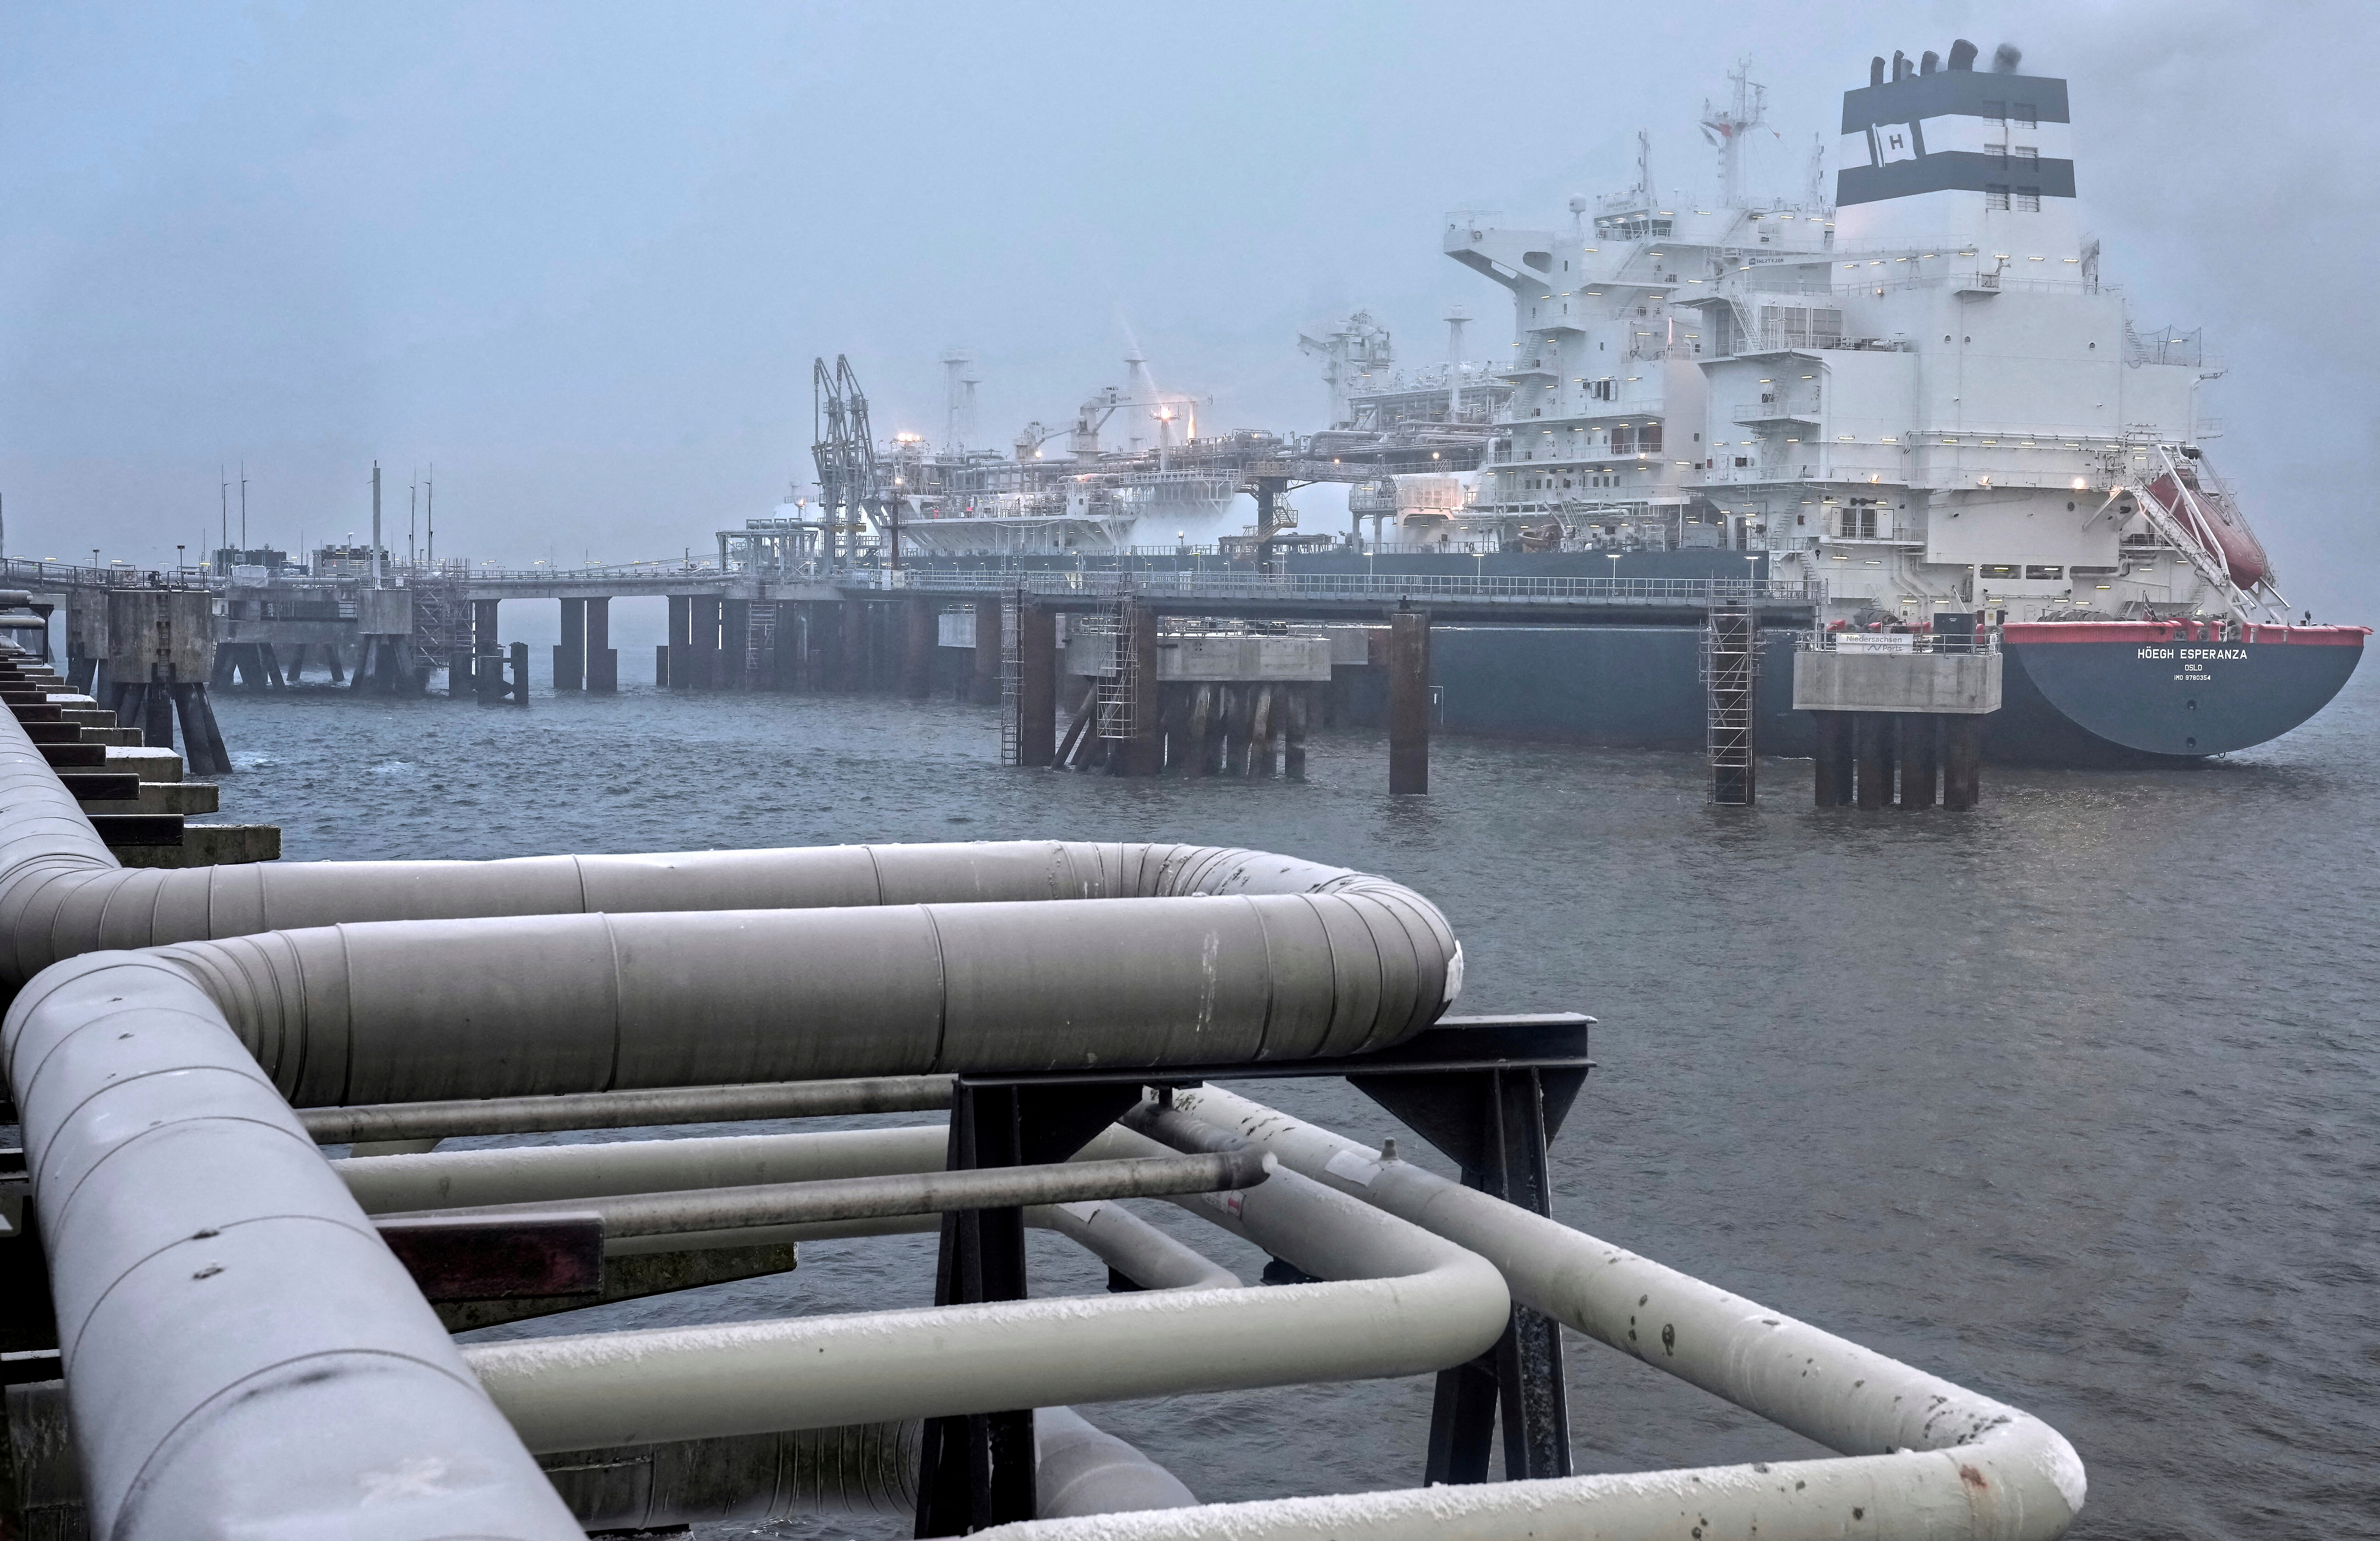 Opening of the LNG terminal in Wilhelmshaven